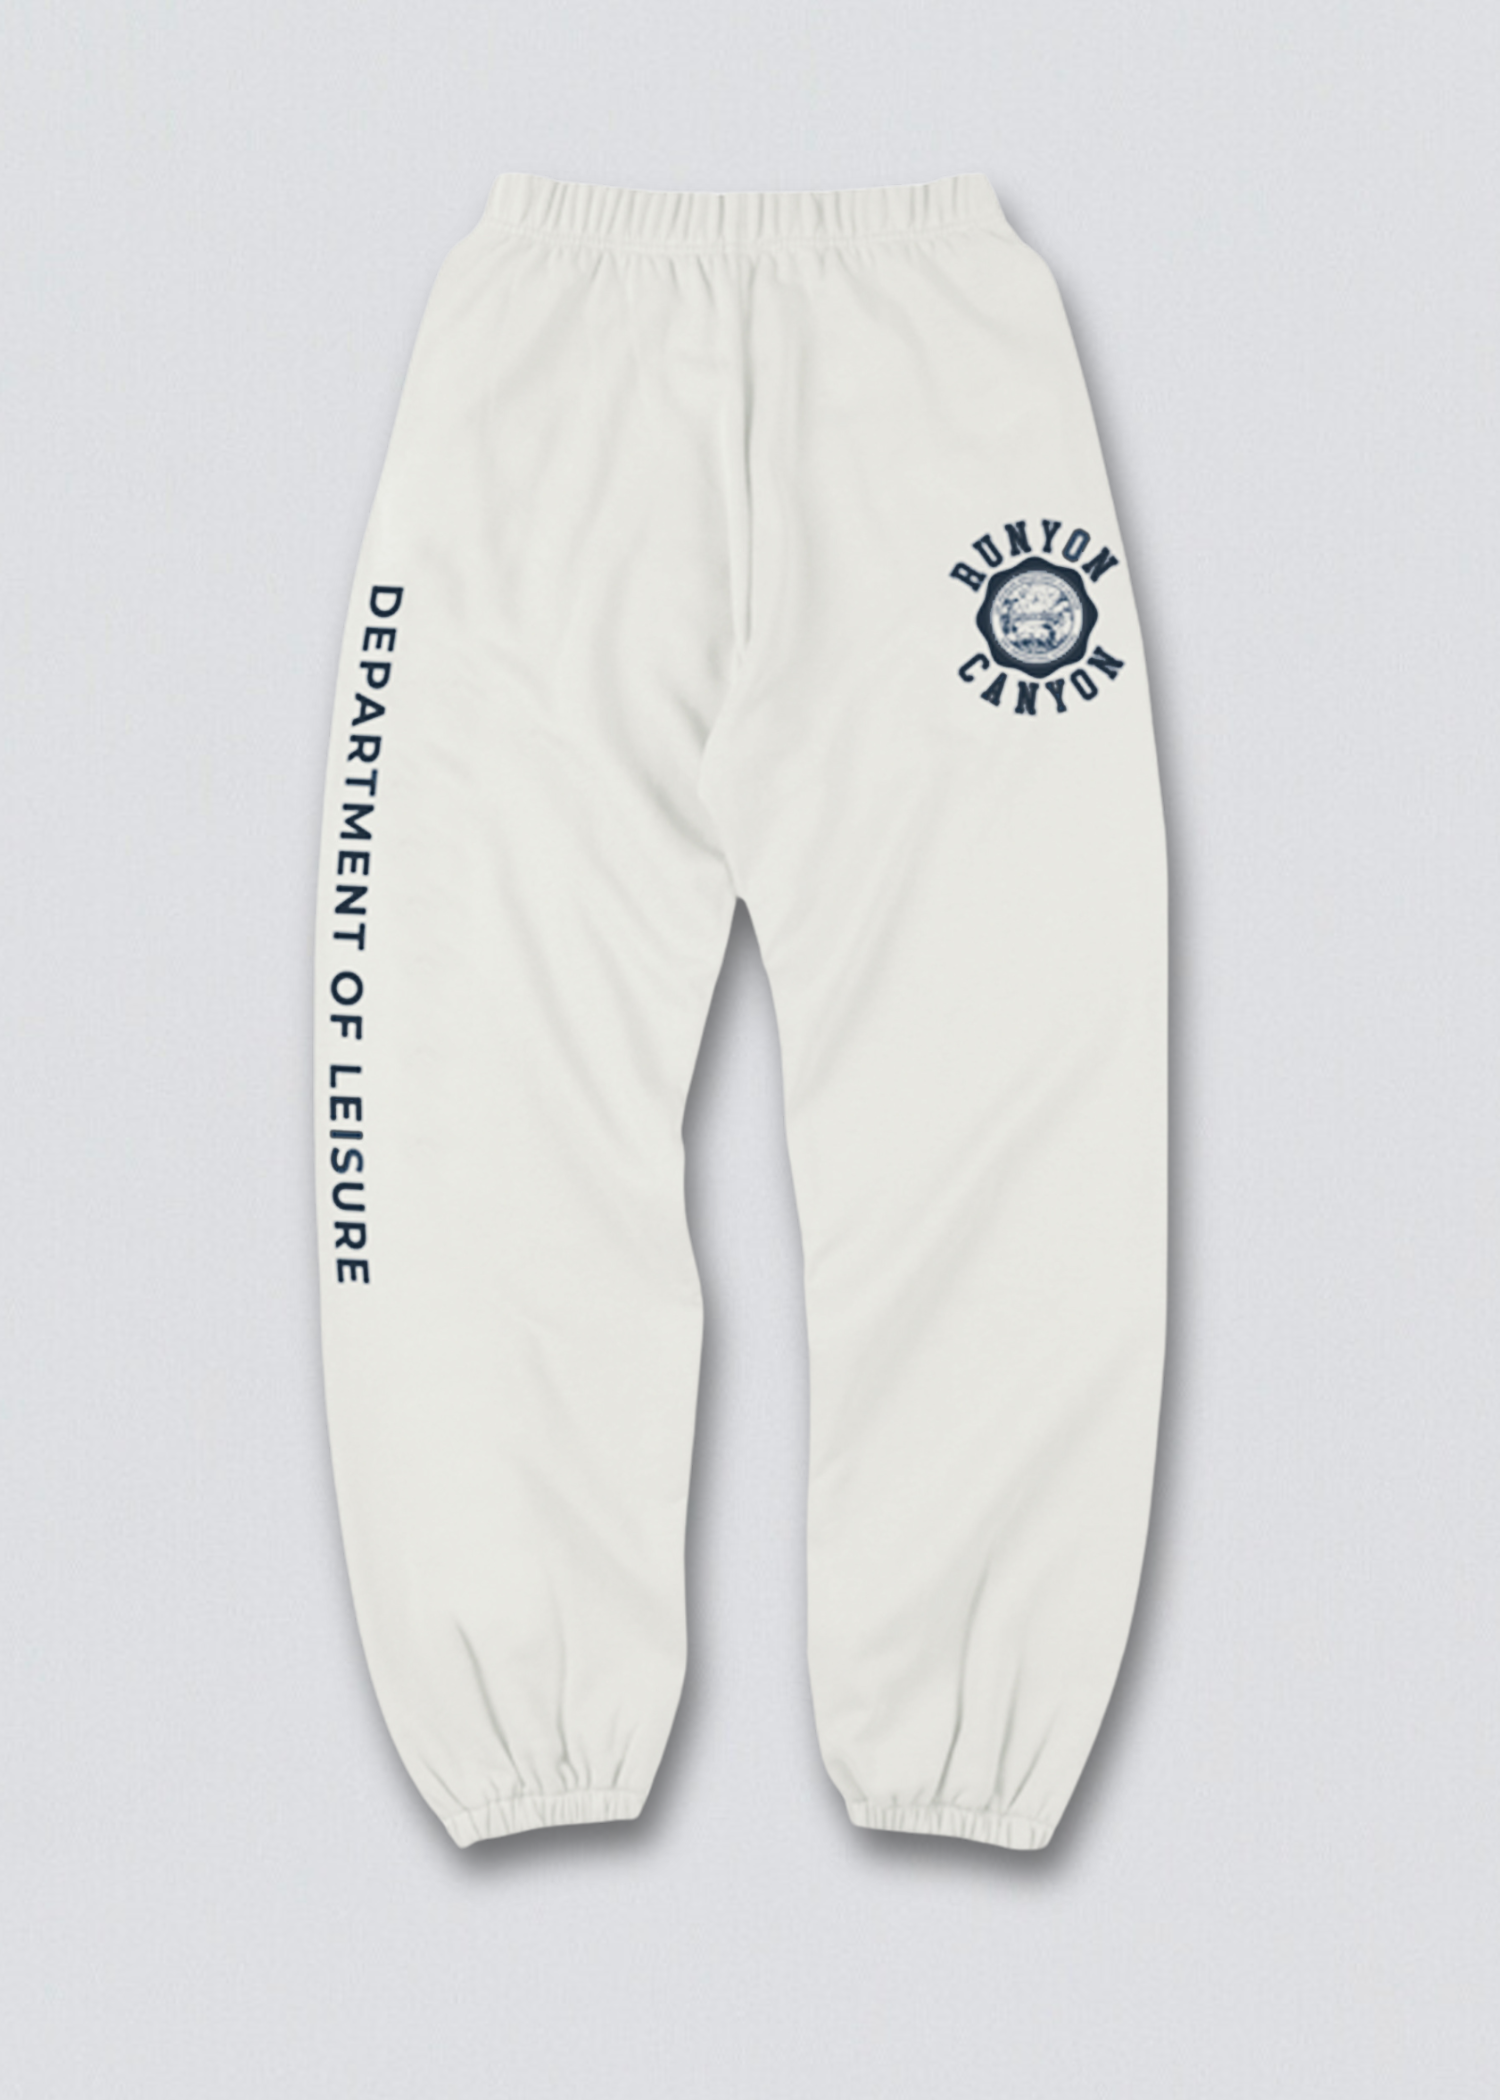 Runyon Canyon Department of Leisure Graphic Sweatpants